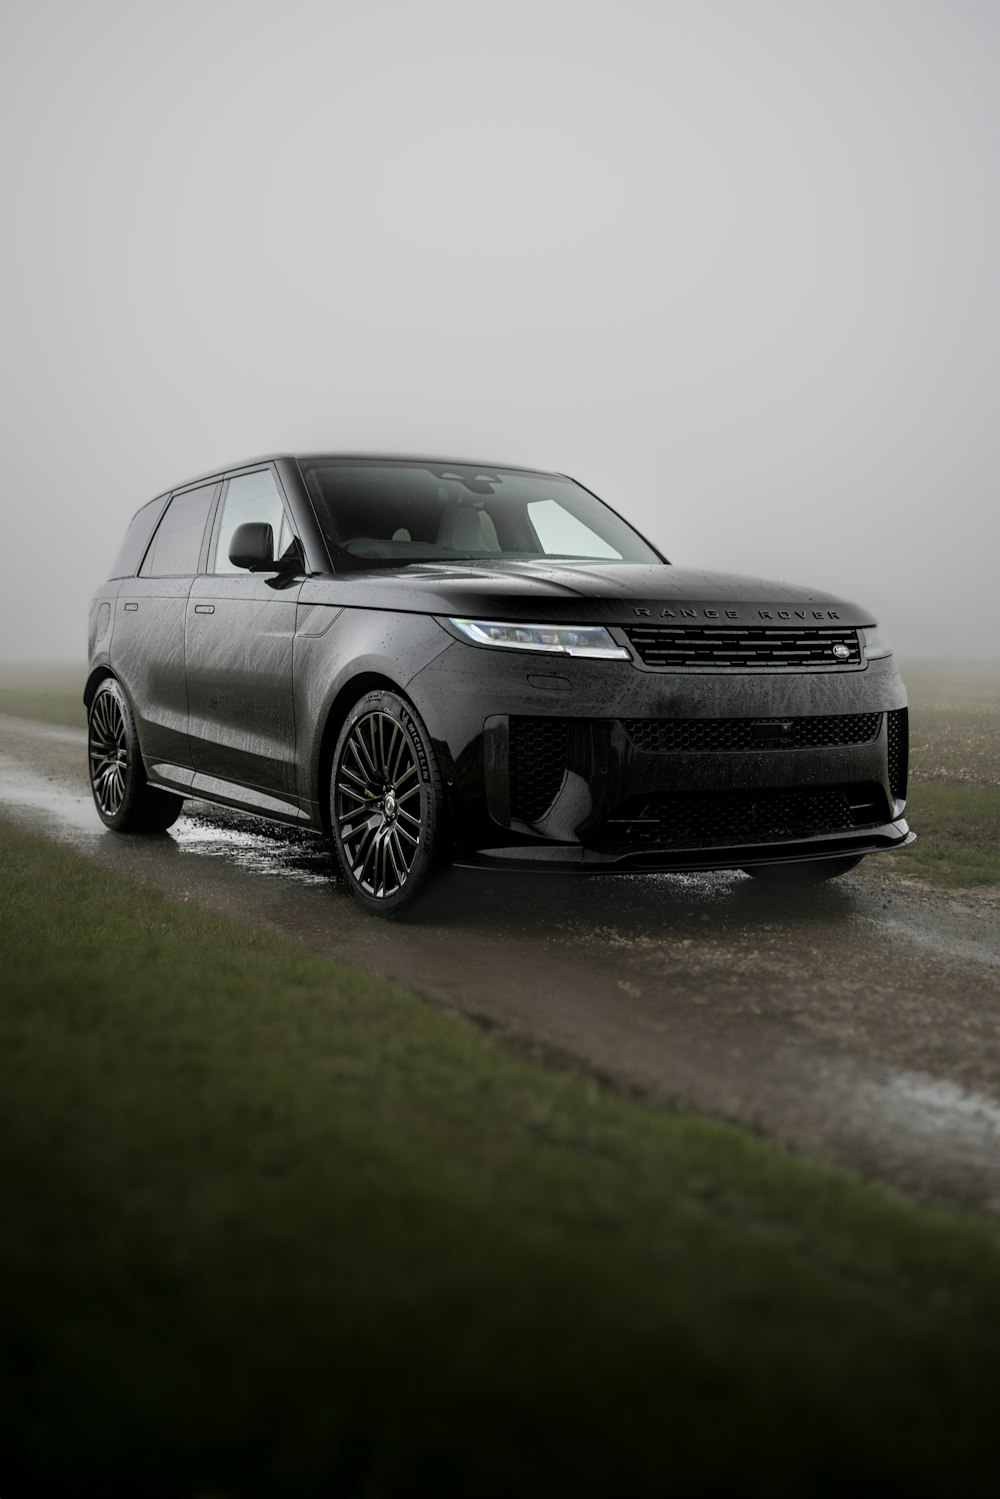 a black range rover driving on a wet road